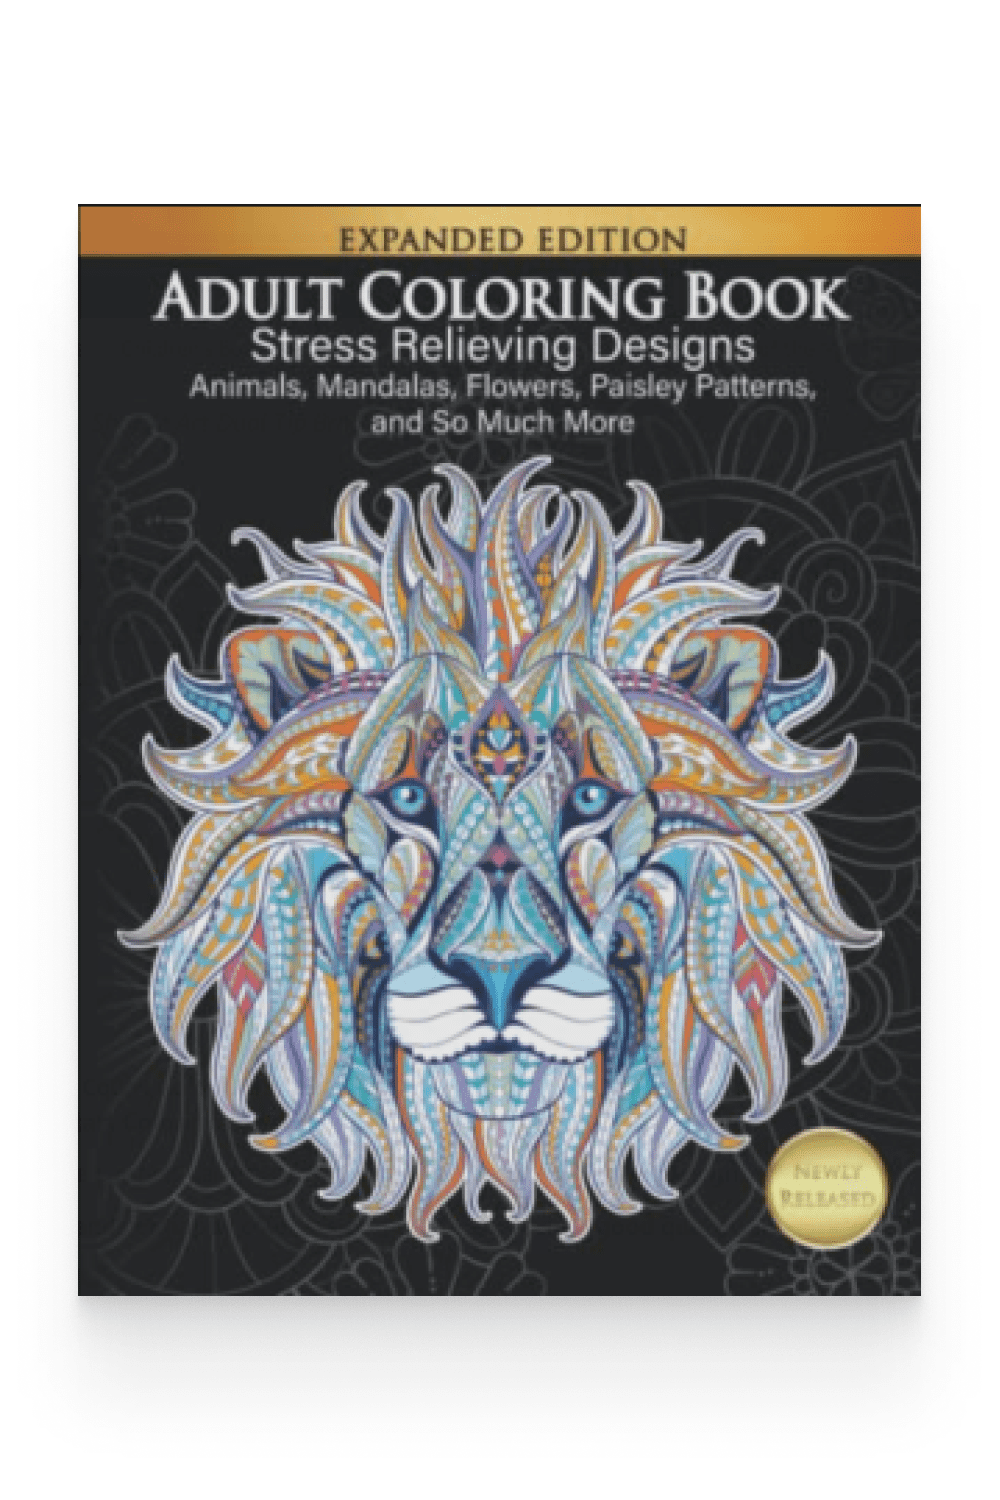 Cover of the Adult Coloring Book.